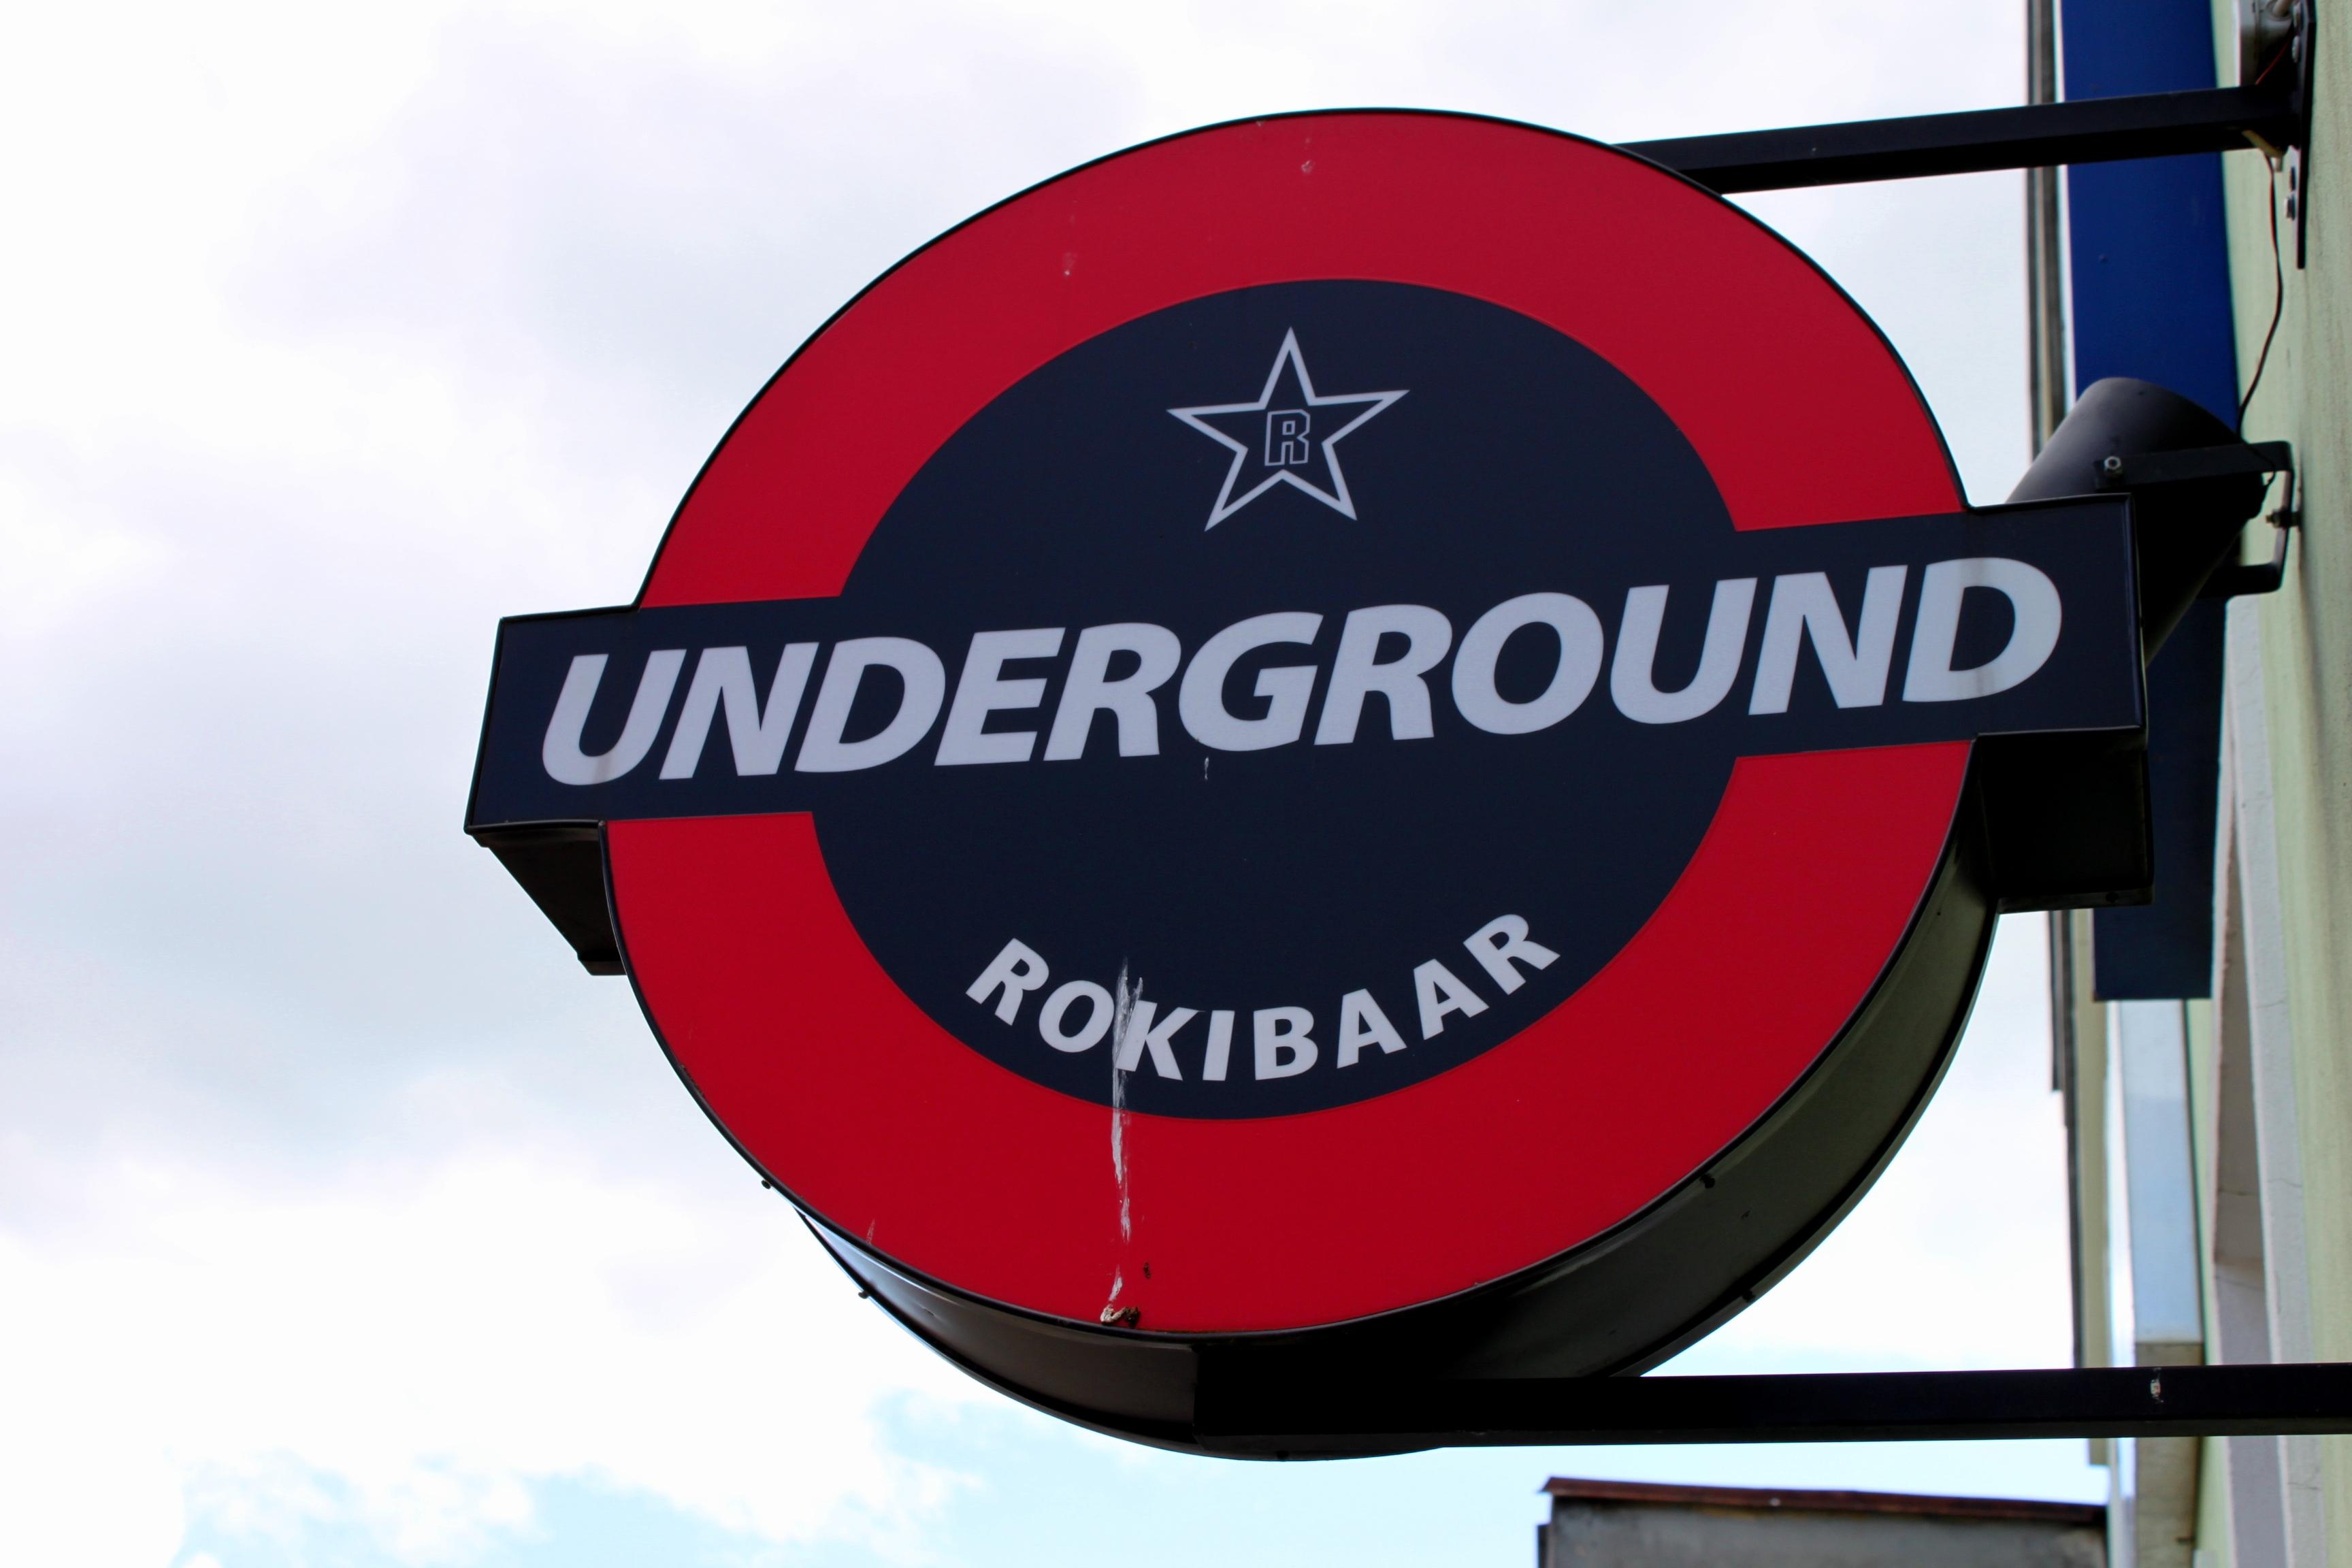 Cover image of this place Underground